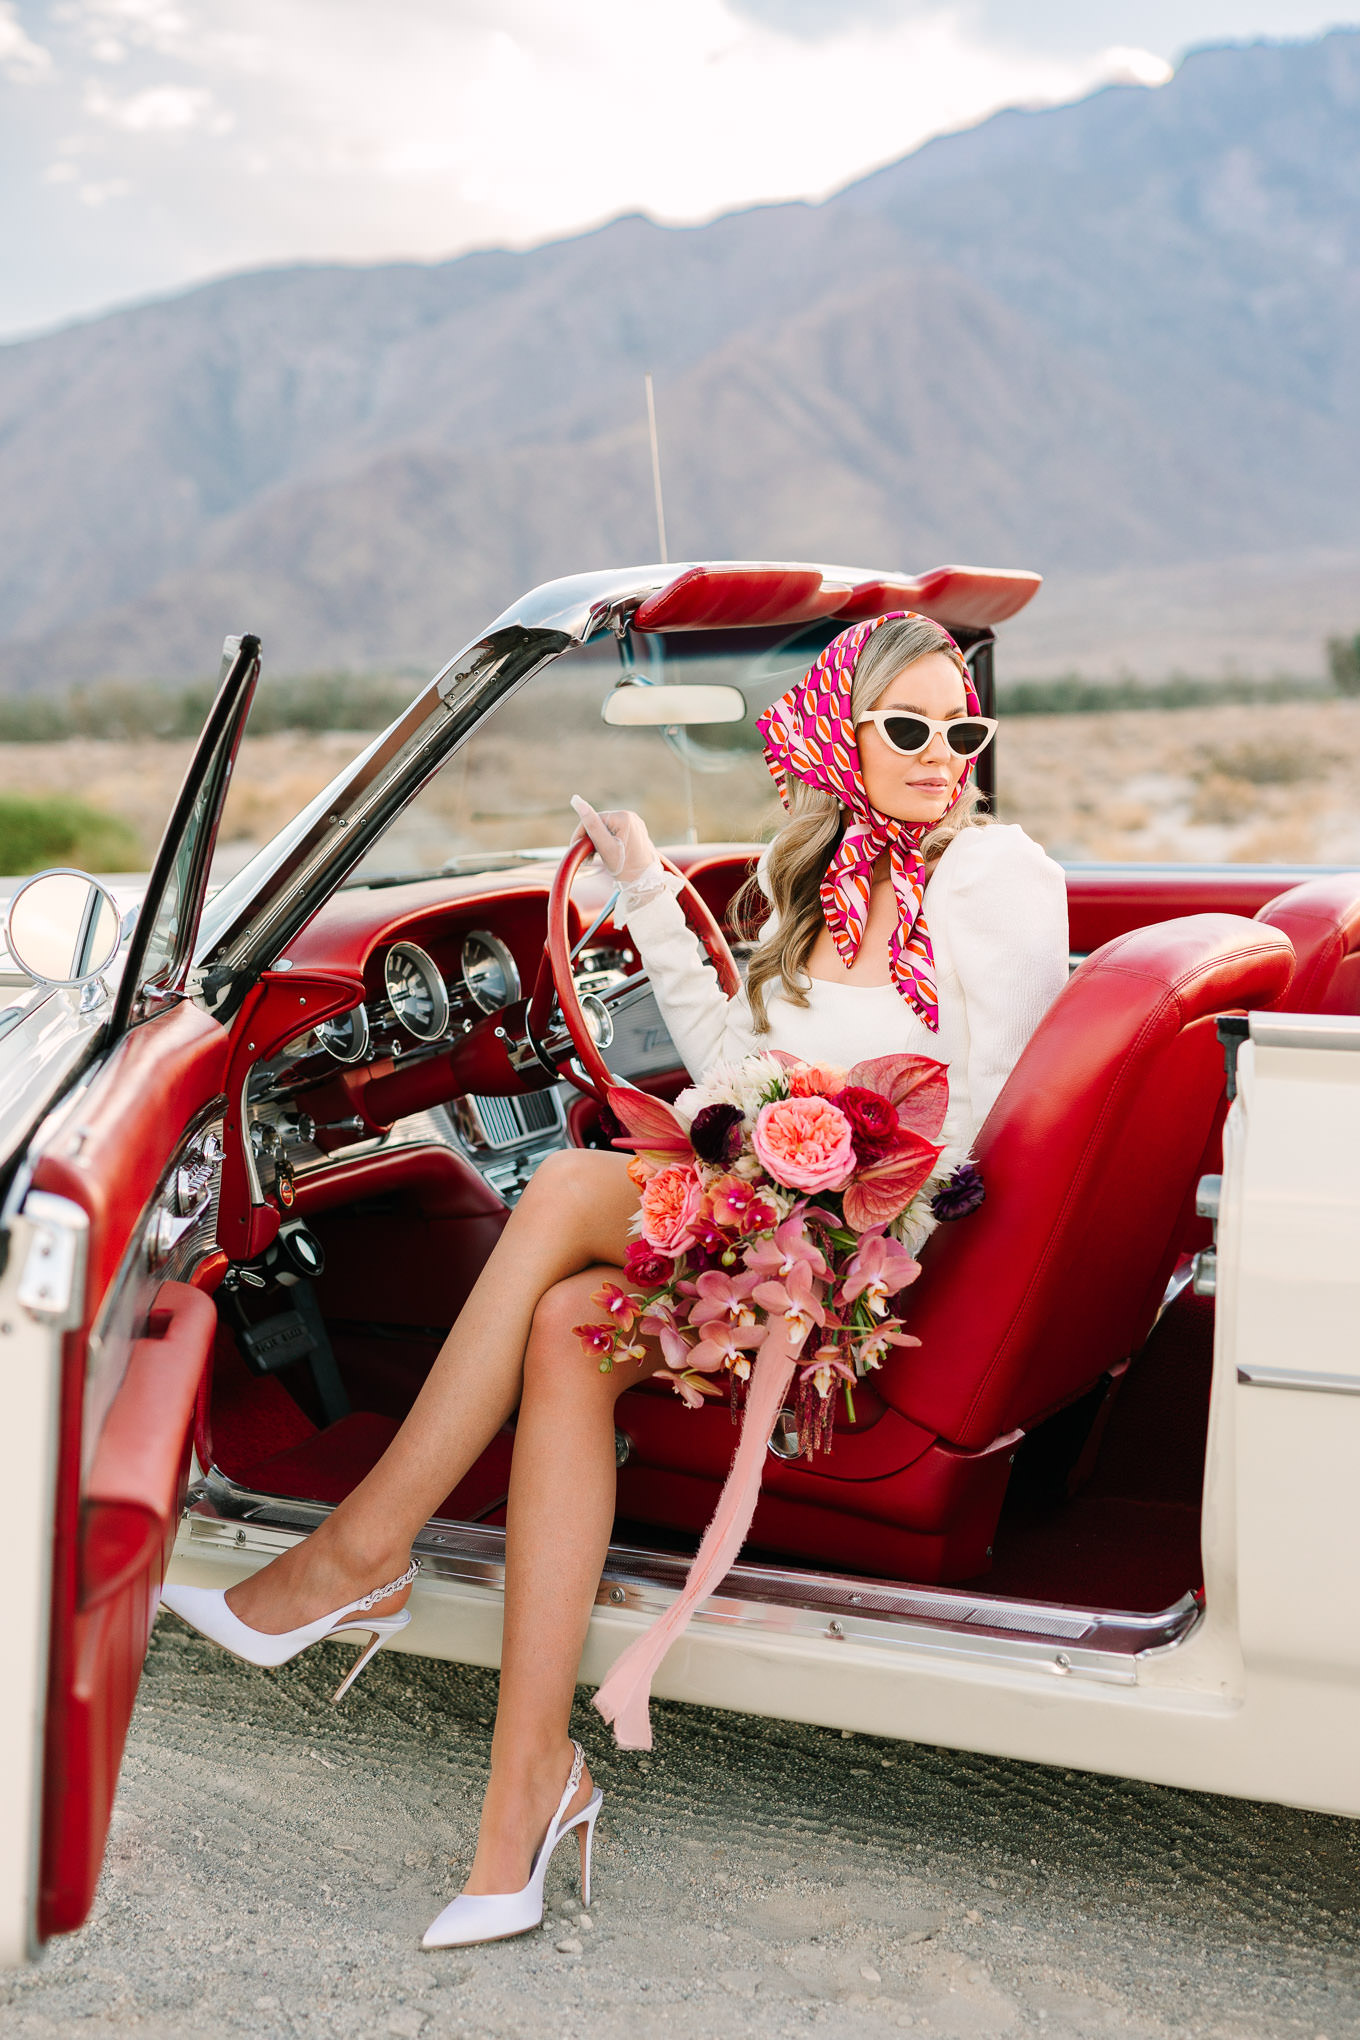 Palm Springs elopement with classic car | Wedding and elopement photography roundup | Los Angeles and Palm Springs photographer | #losangeleswedding #palmspringswedding #elopementphotographer Source: Mary Costa Photography | Los Angeles